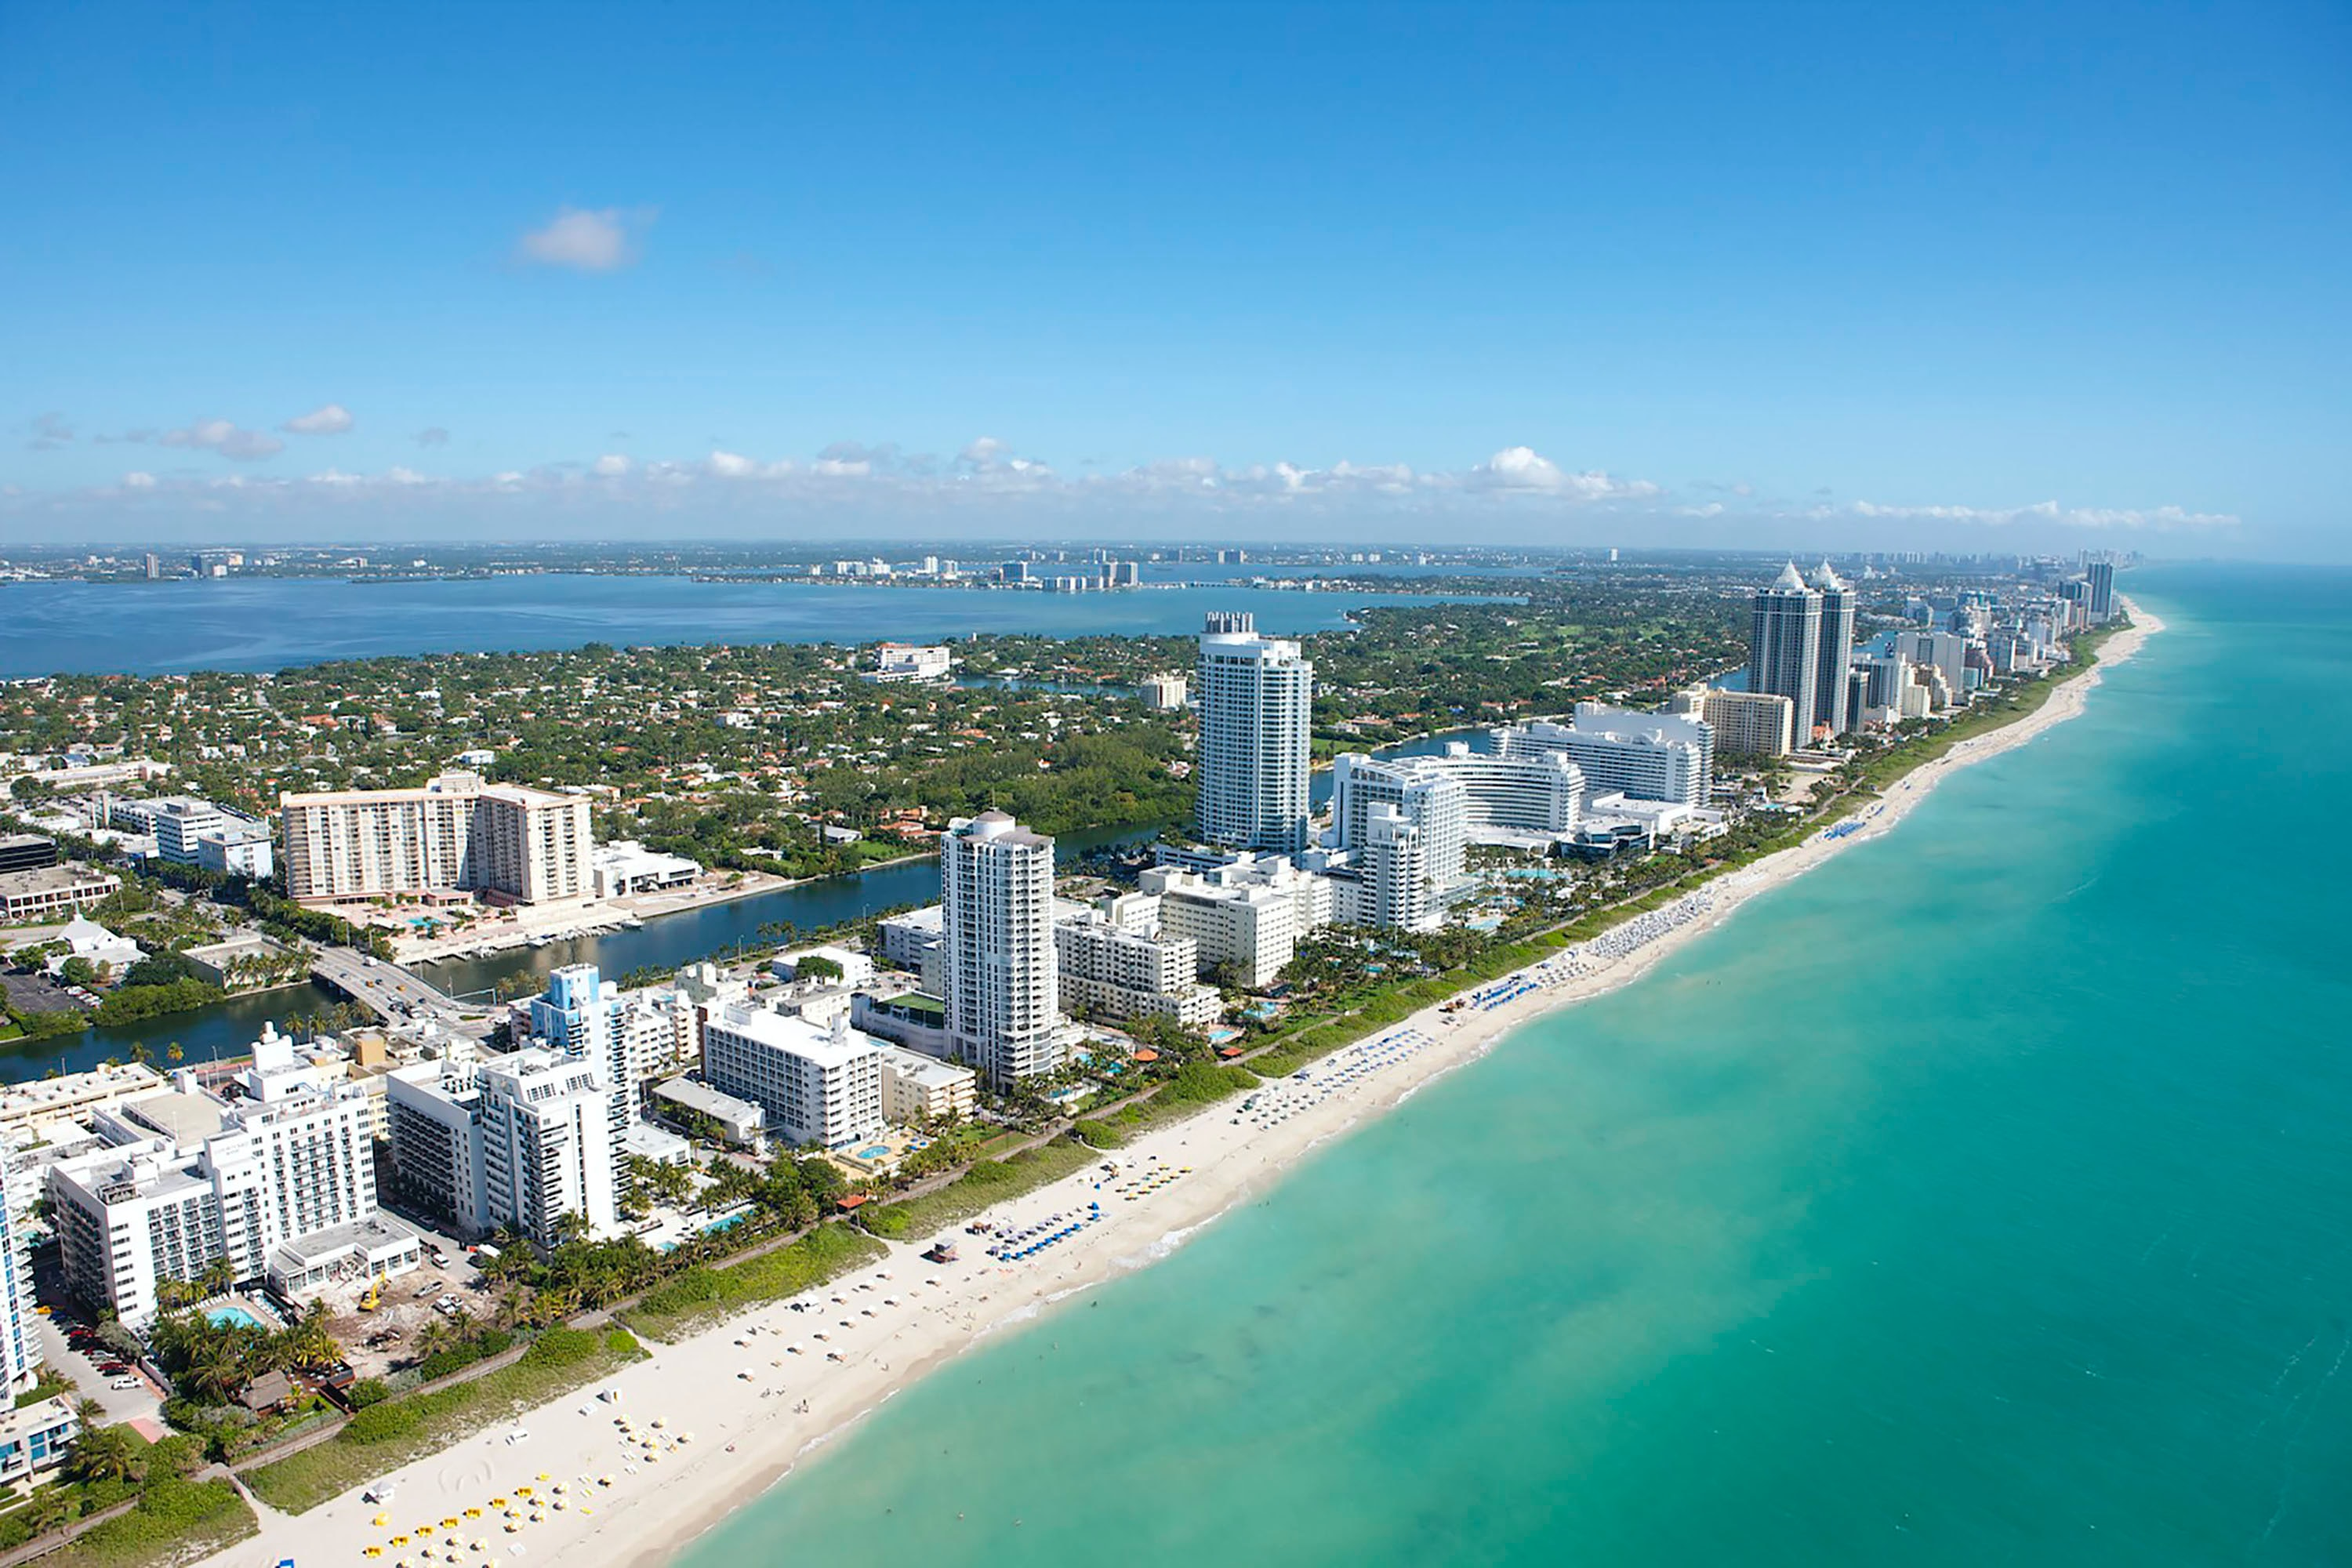 An arial view of Miami Beach, FL. As a car transport company we make sure all car arrived on time with reasonable car transport rates. When it comes to vehicle shipping, we are the experts.